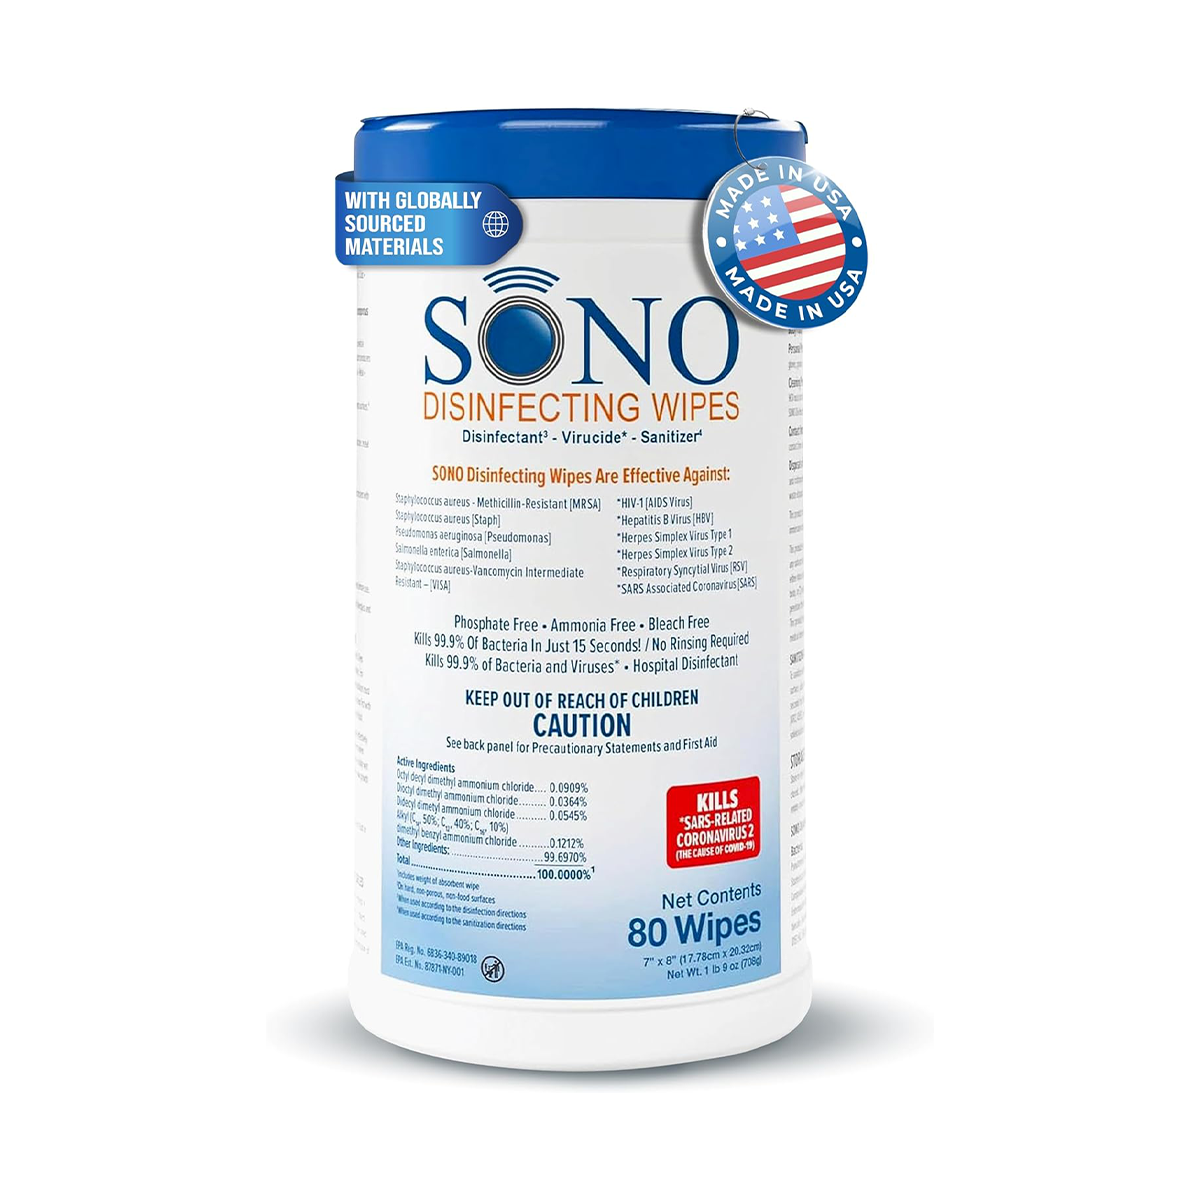 Close-up of SONO Disinfecting Wipes canister showcasing the product's packaging and label.